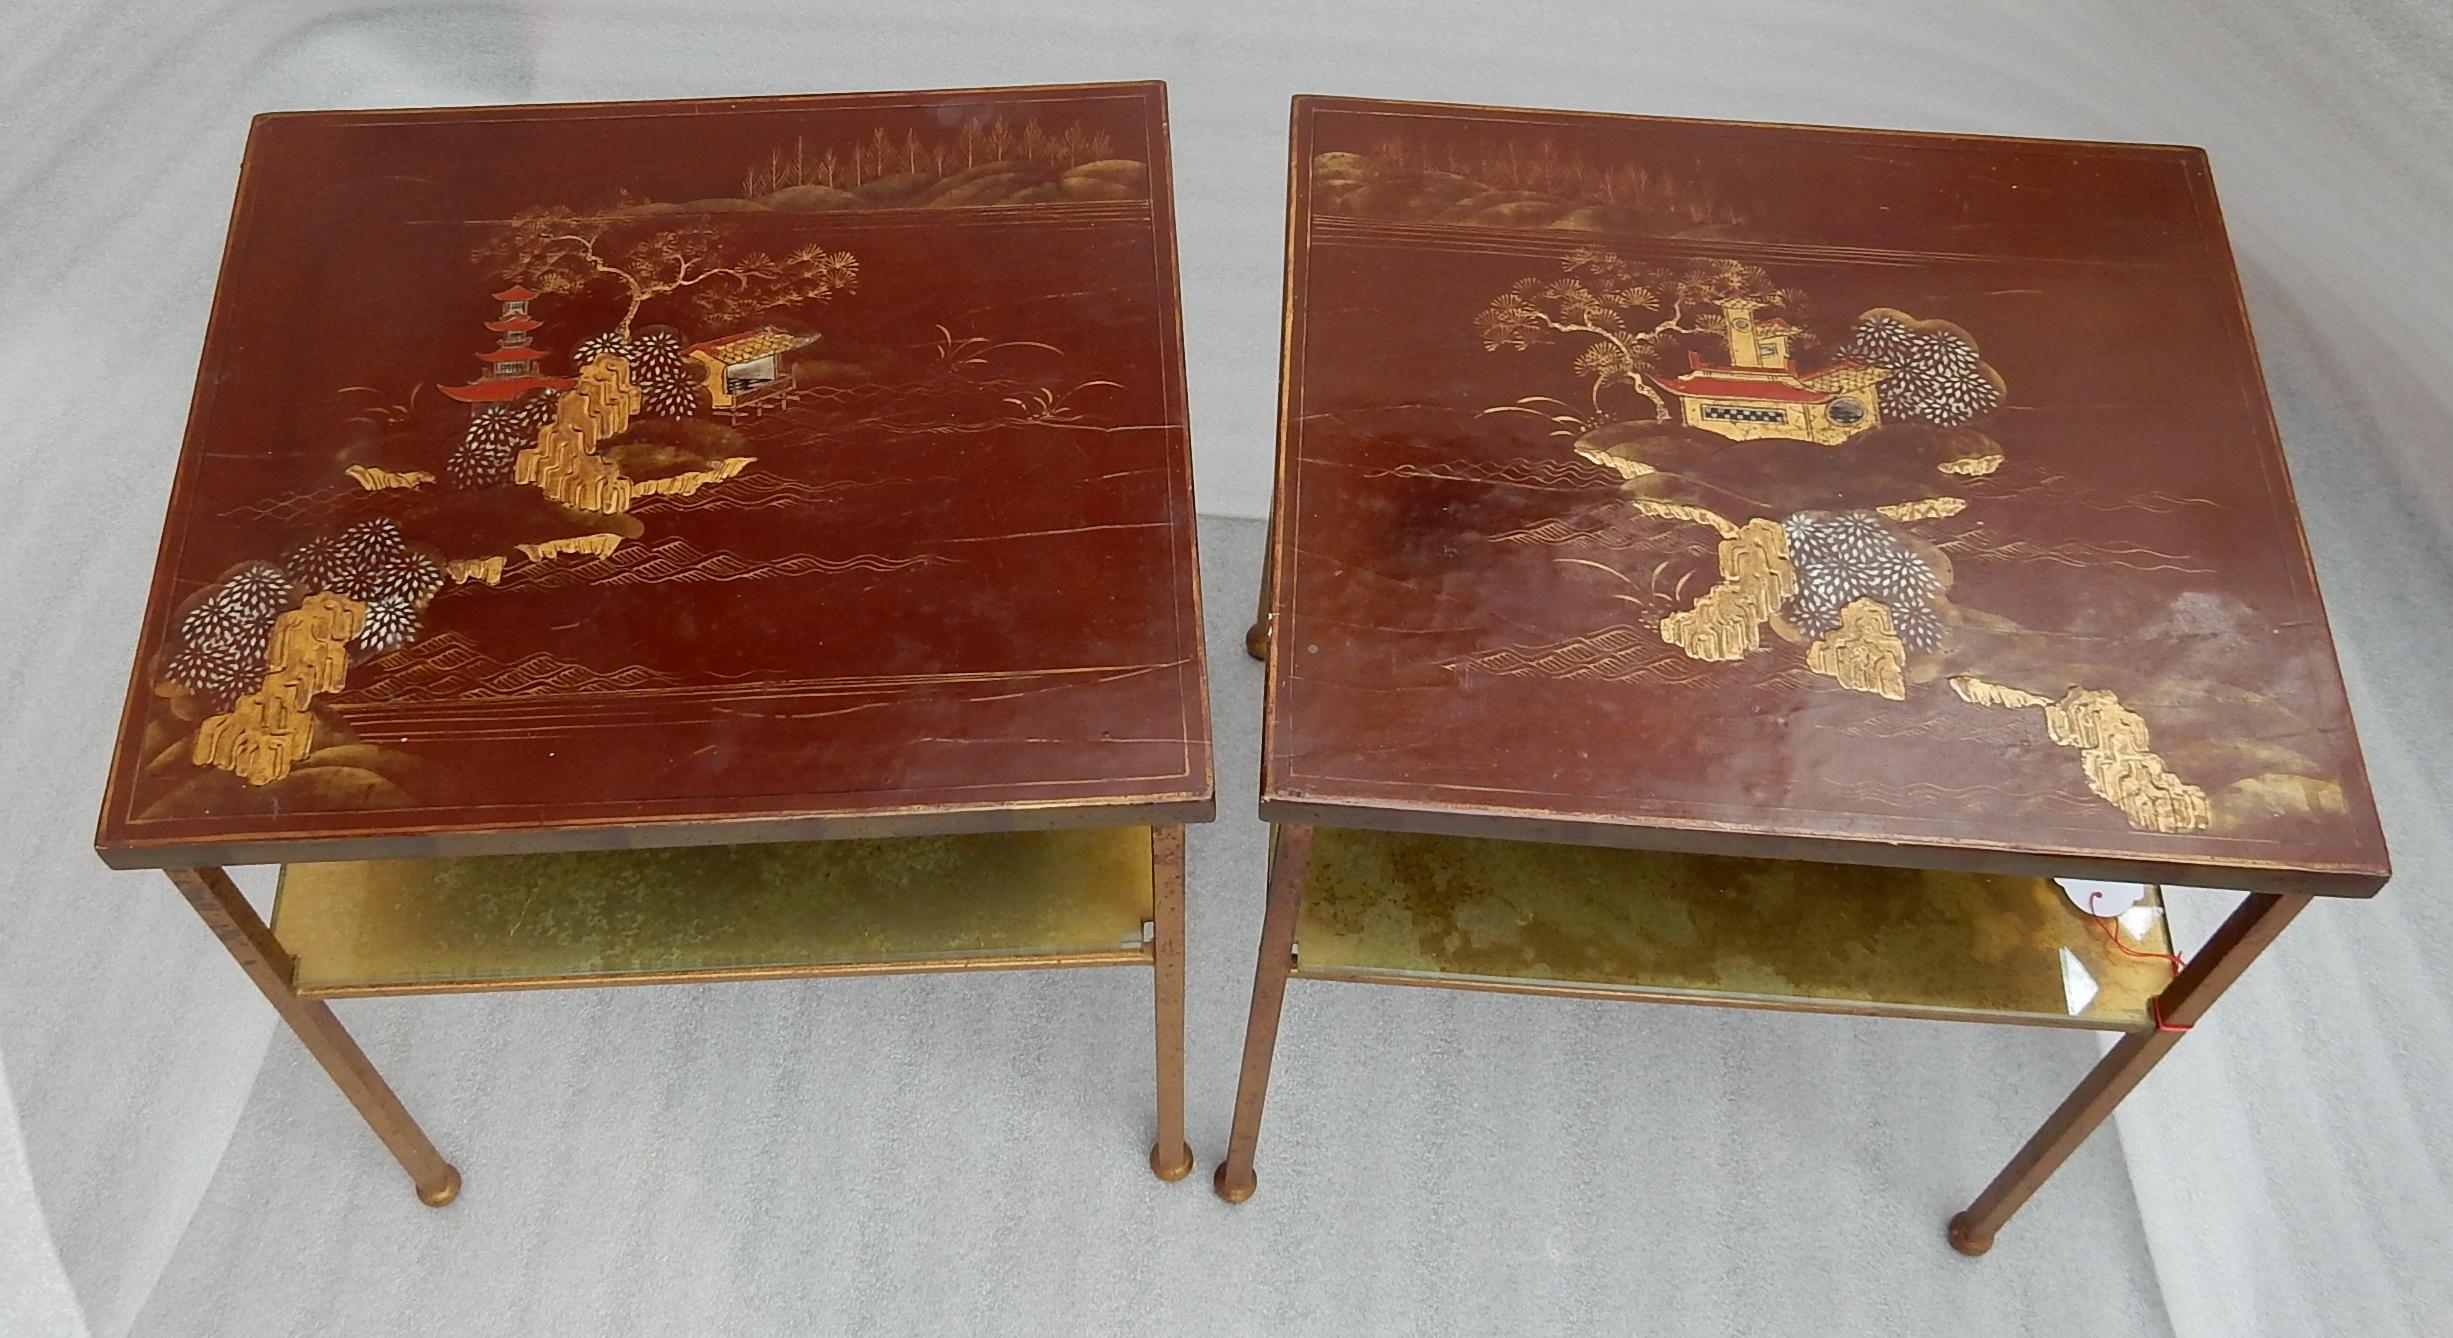 Pair of gilded iron tables red and gold lacquer trays and shelf in fixed under glass decorated with aged oxidized metal
Circa 1950/70
Condition of use
Measures: Length: 39 cm
Width: 34 cm
Height: 44 cm.